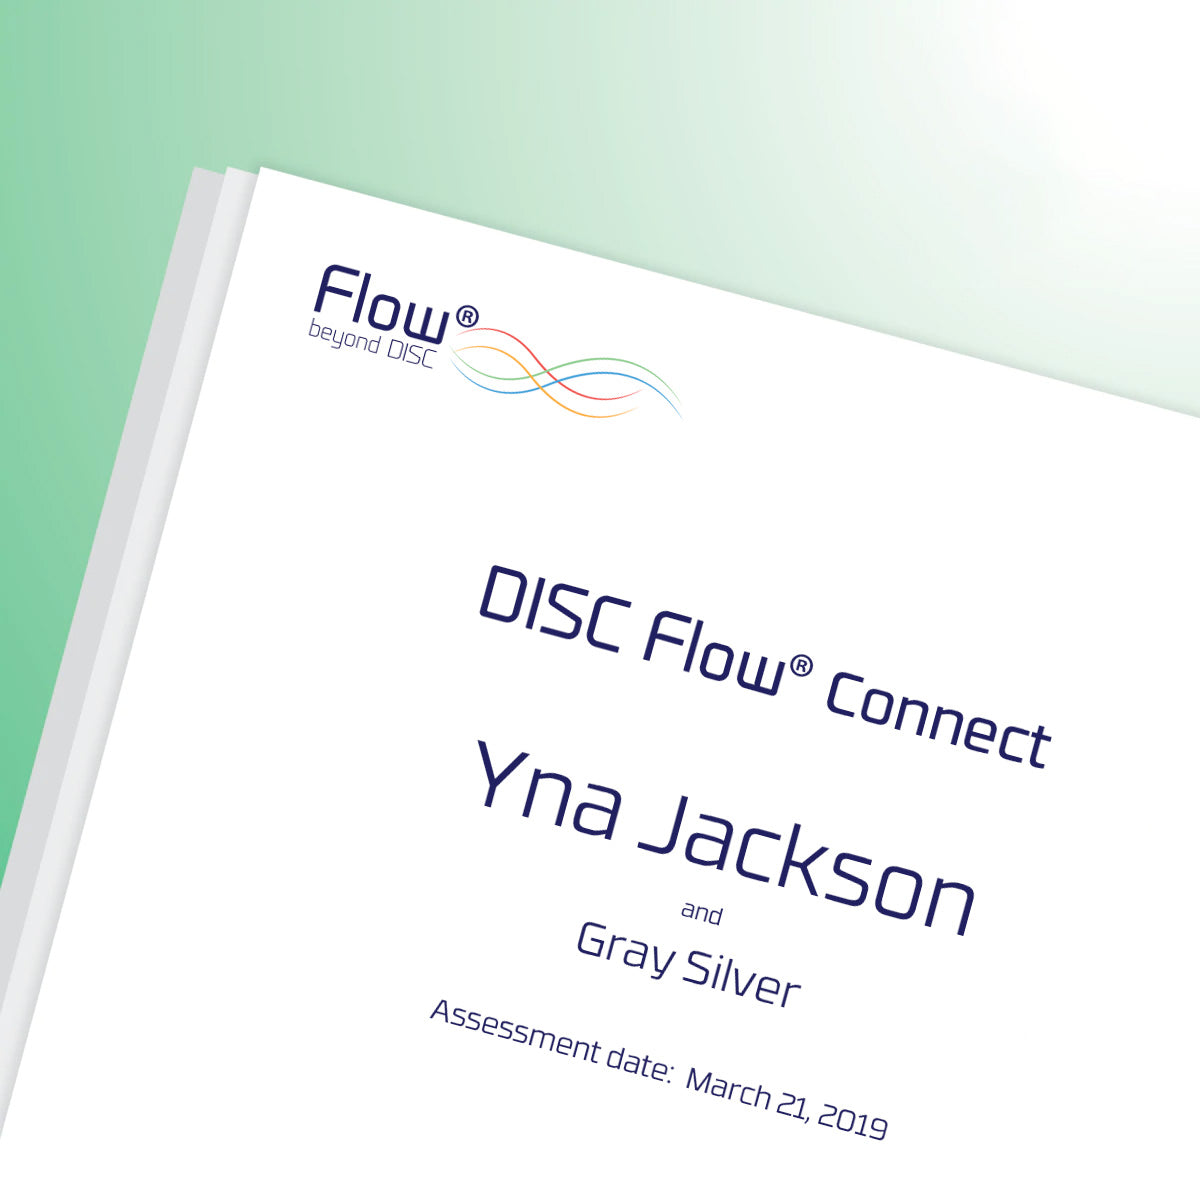 DISC Flow® CONNECT Report